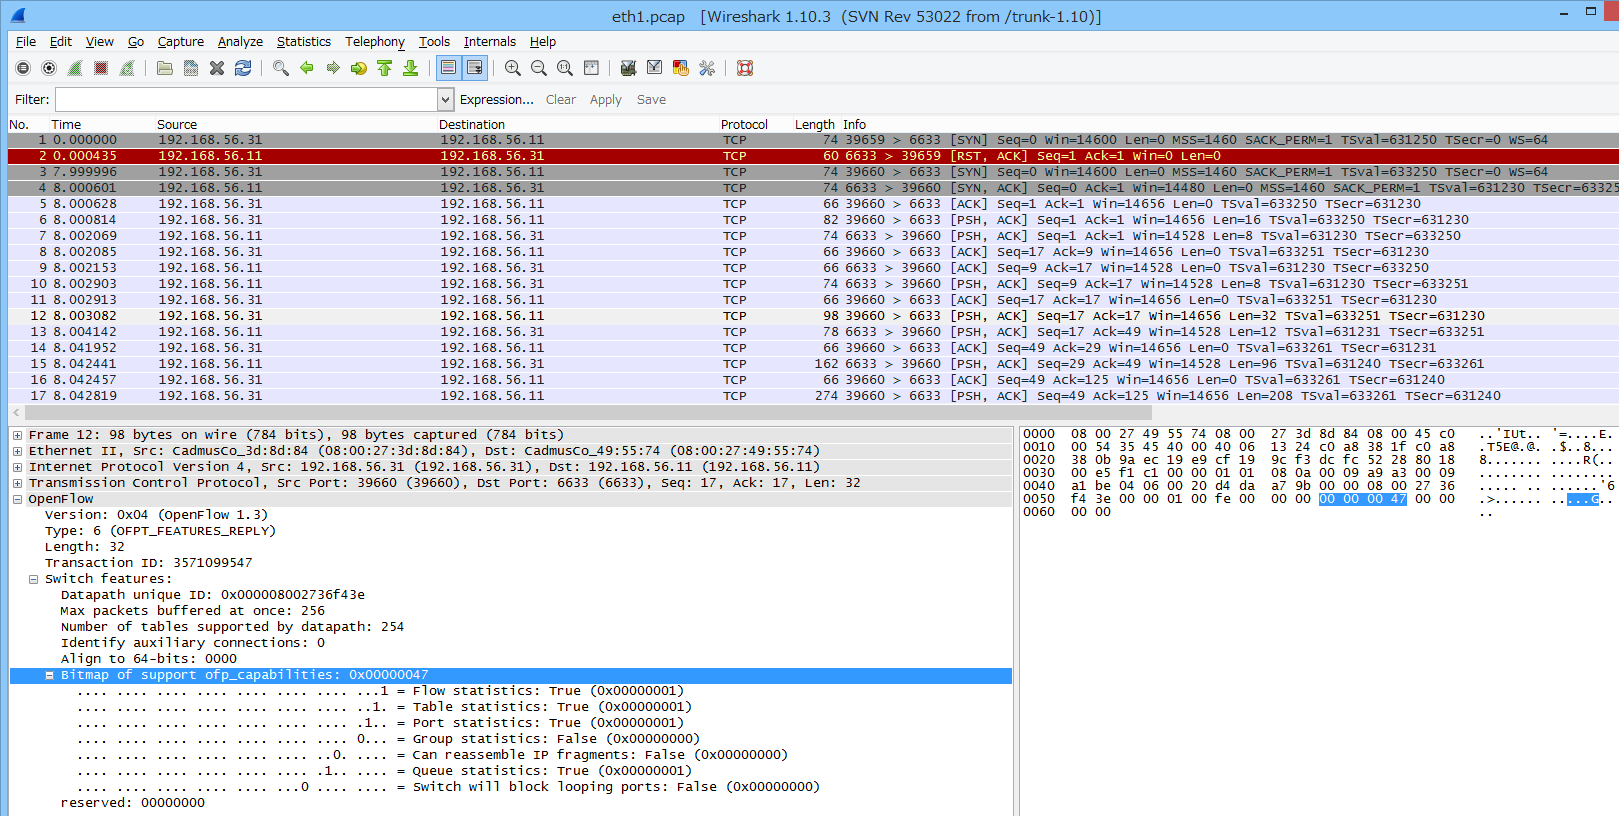 wireshark_dissector_of13_02.png